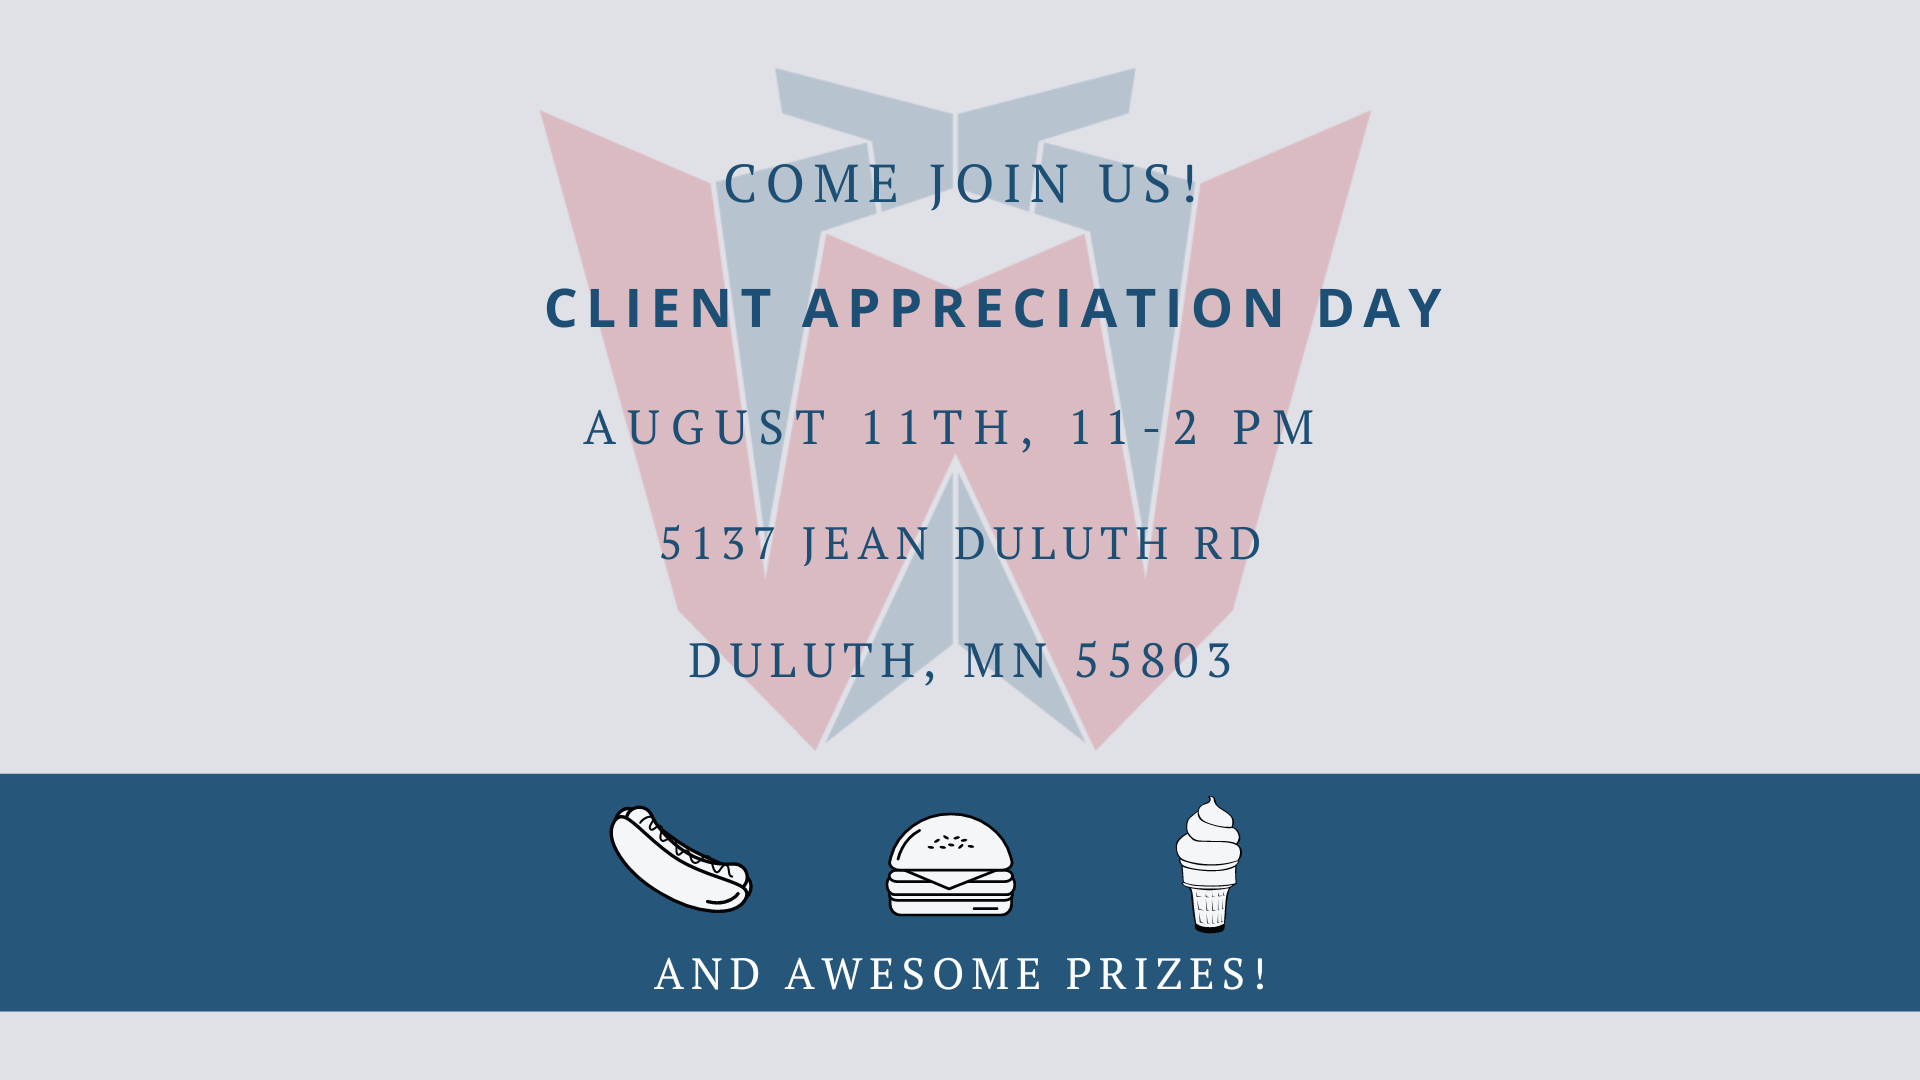 Duluth Client Appreciation Flyer with information about where, when, and what's going to be there